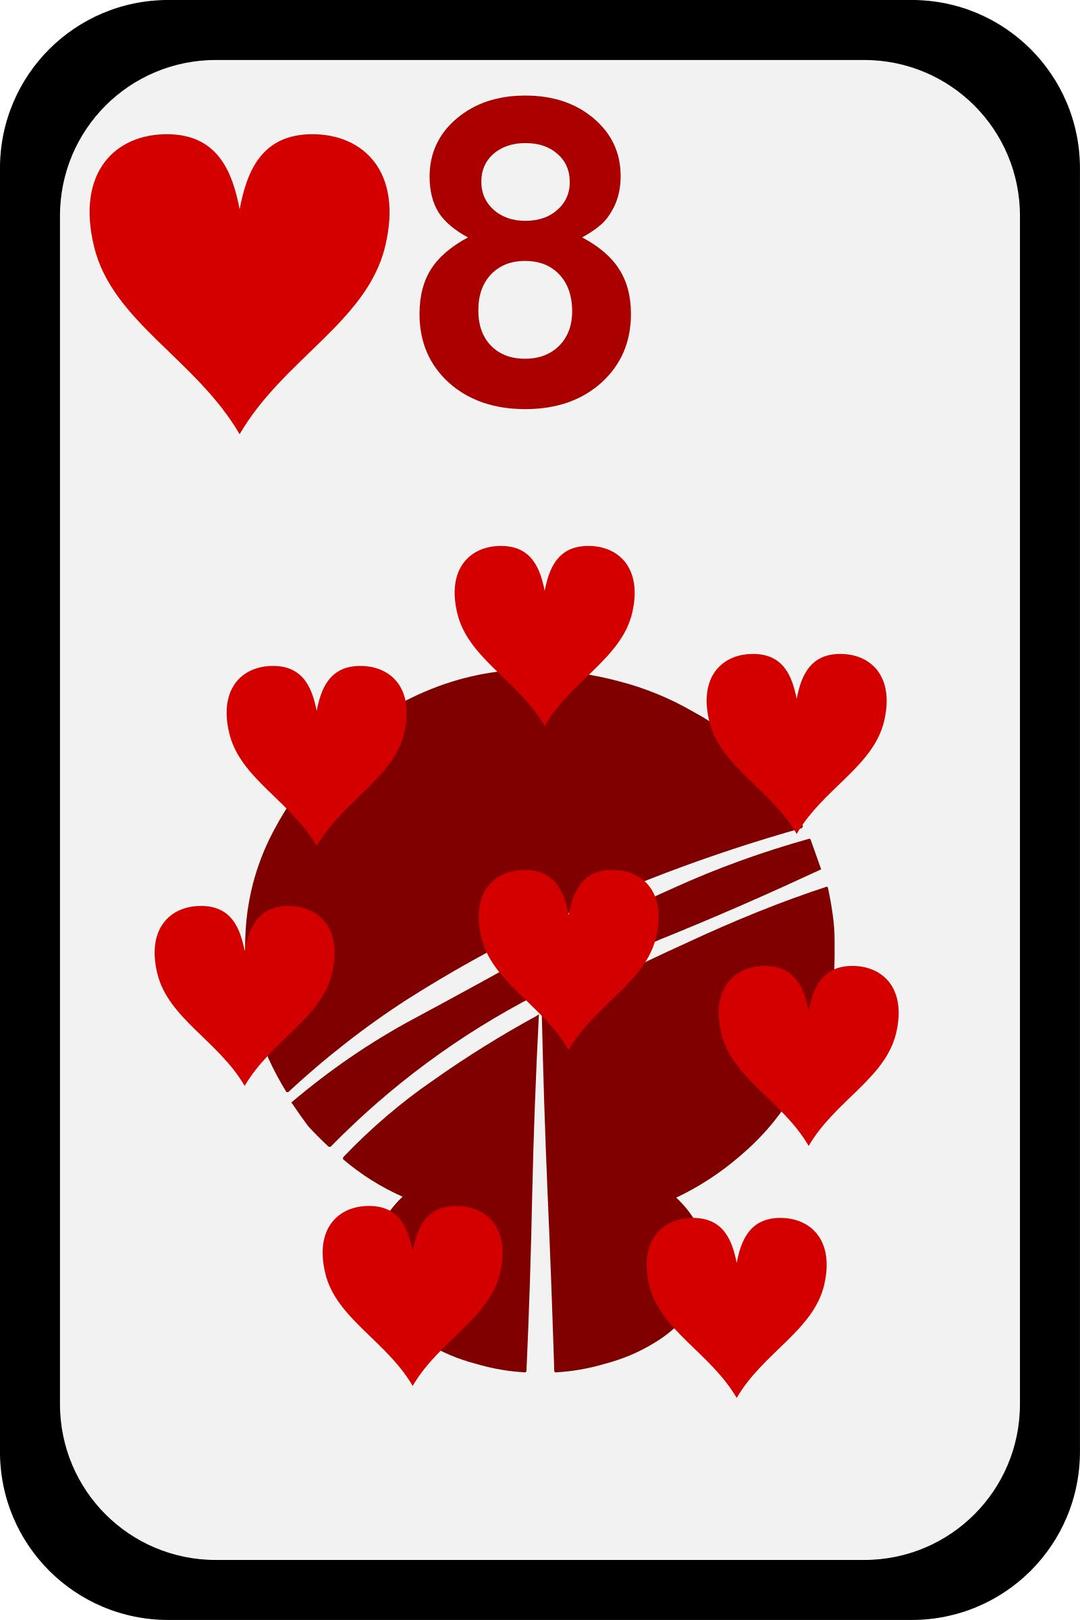 Eight of Hearts png transparent